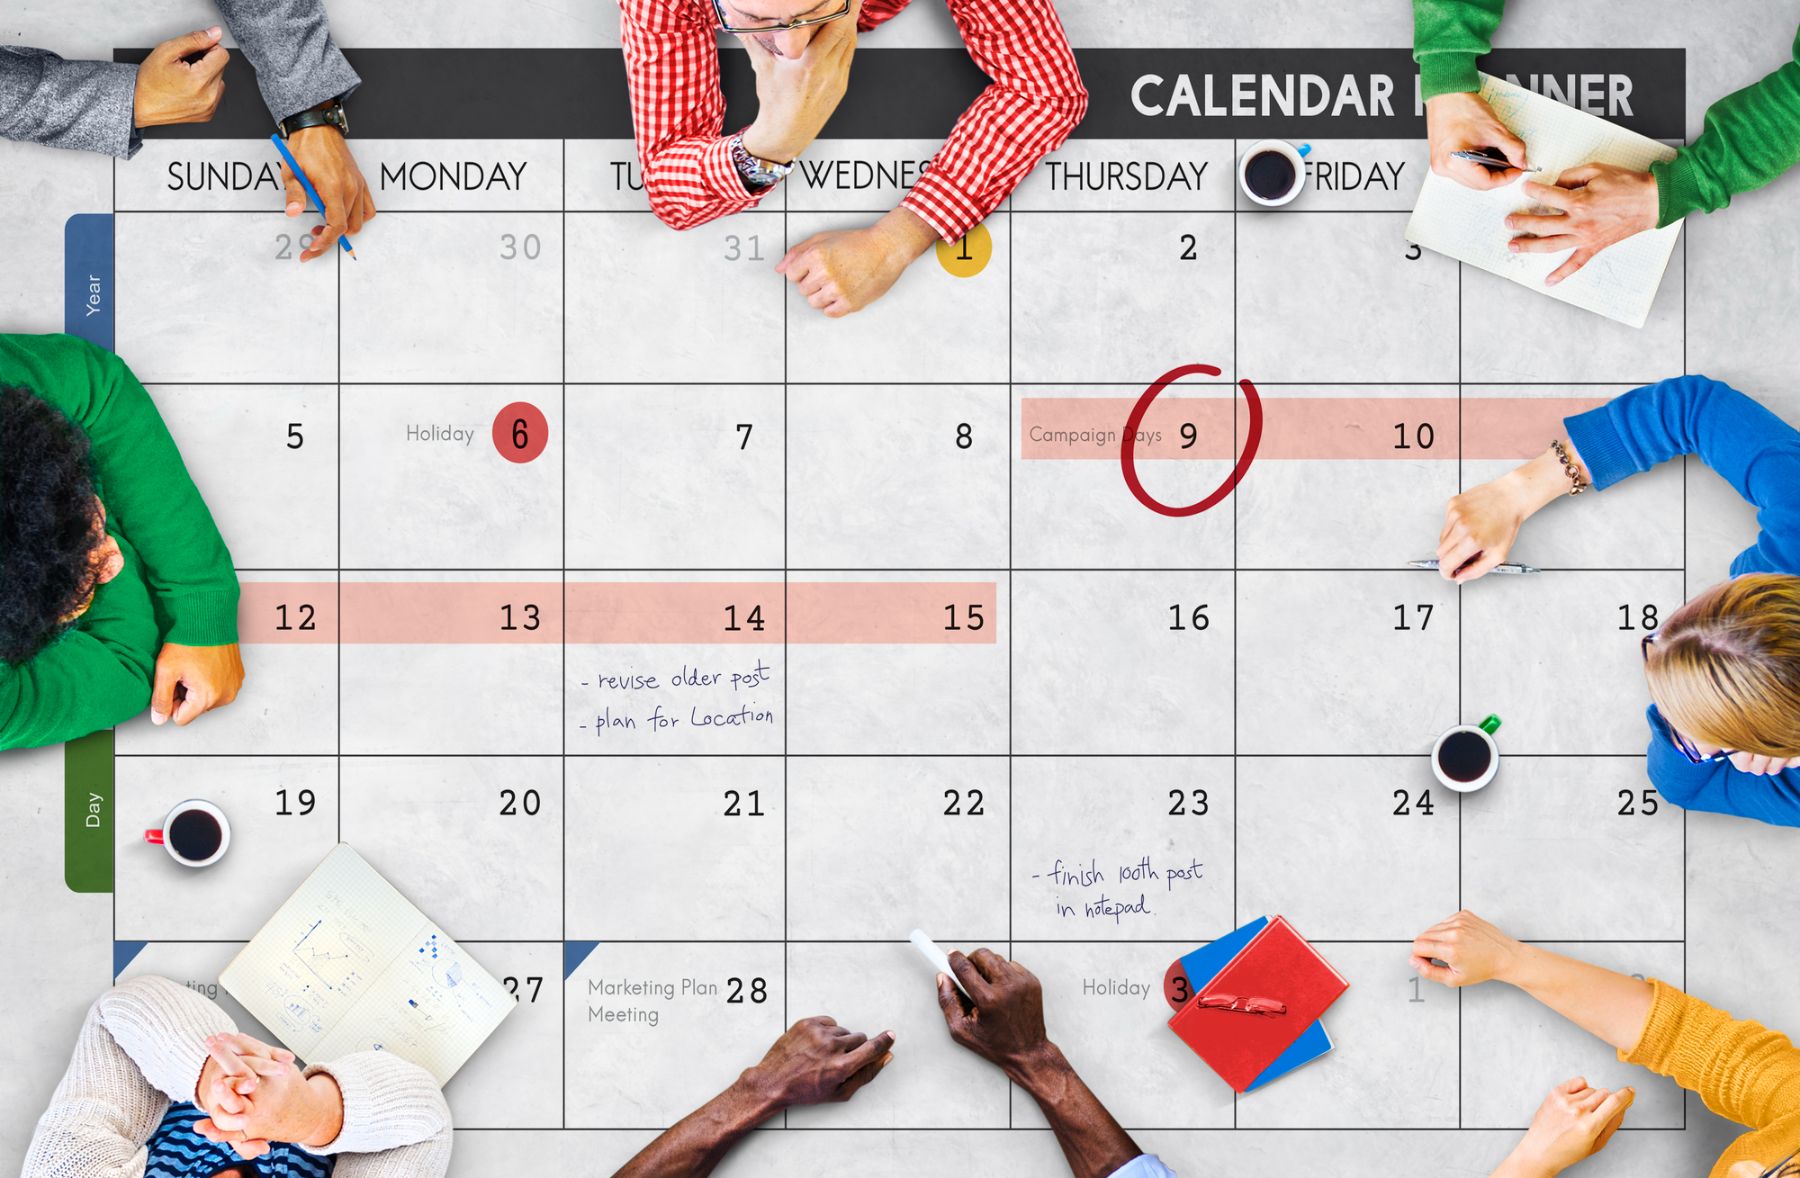 Coworkers discussing dates on a calendar